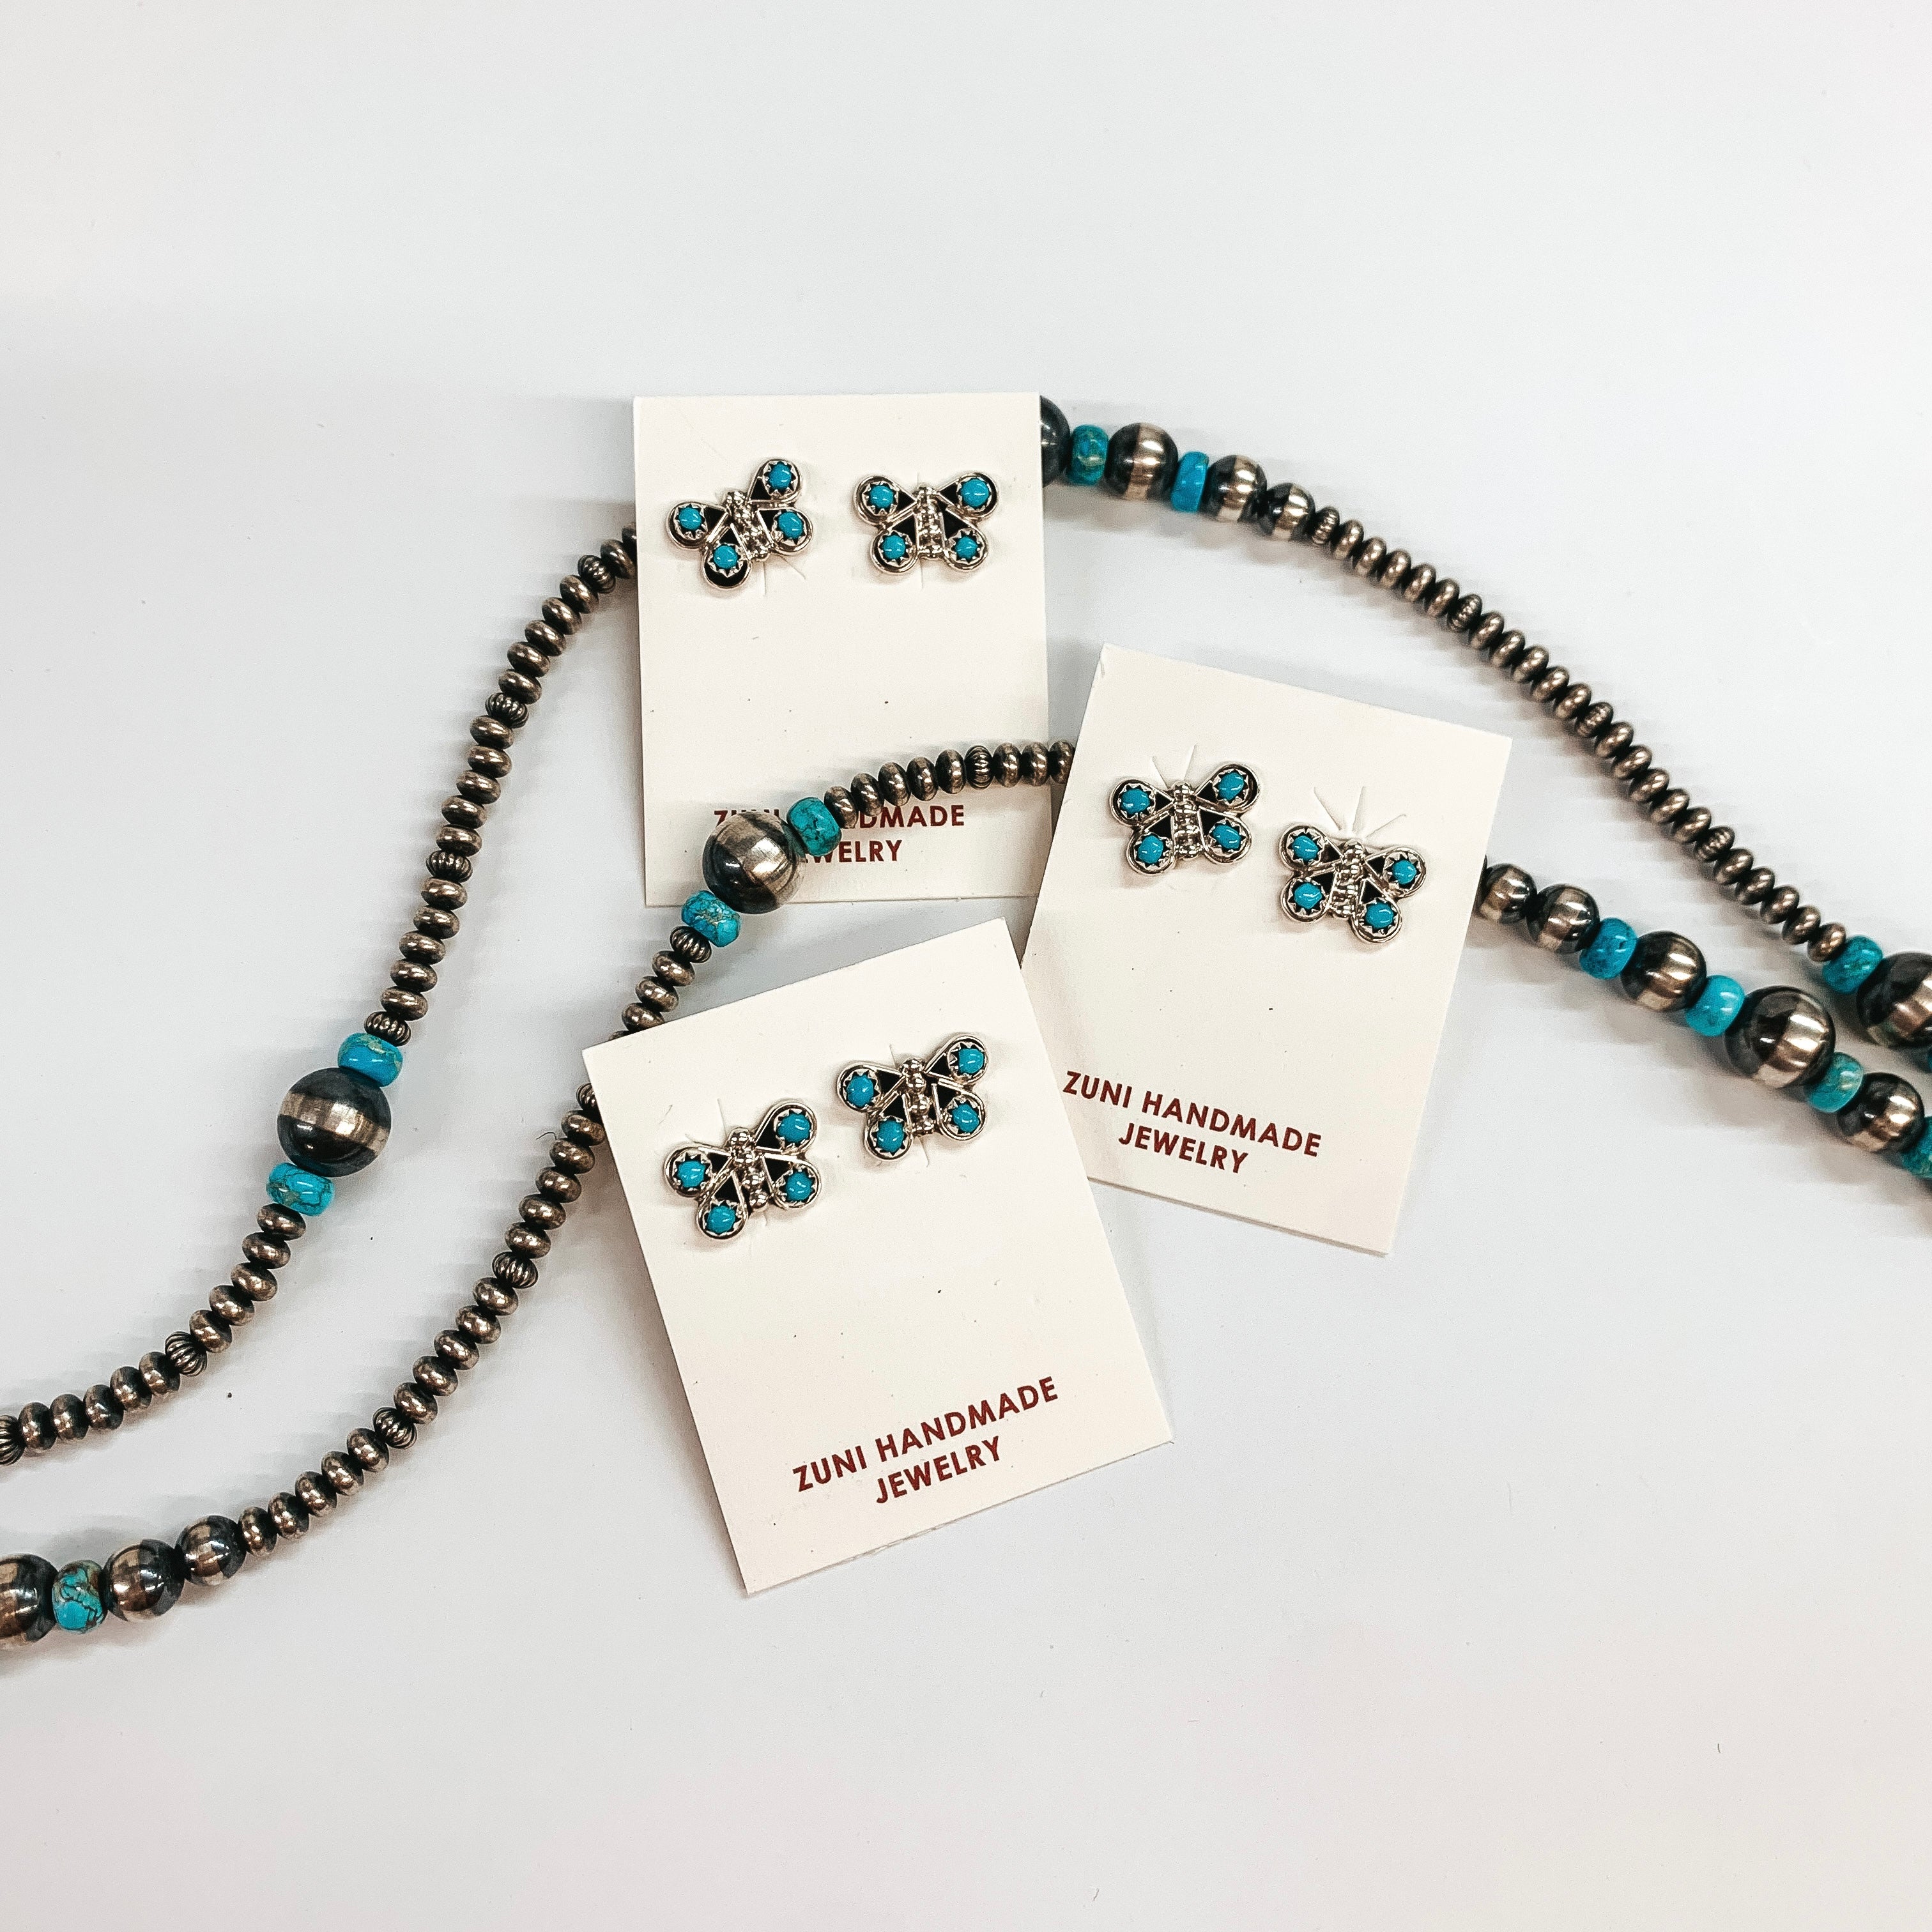 Zuni | Zuni Handmade Genuine Sterling Butterfly Earrings with Small Turquoise Stones